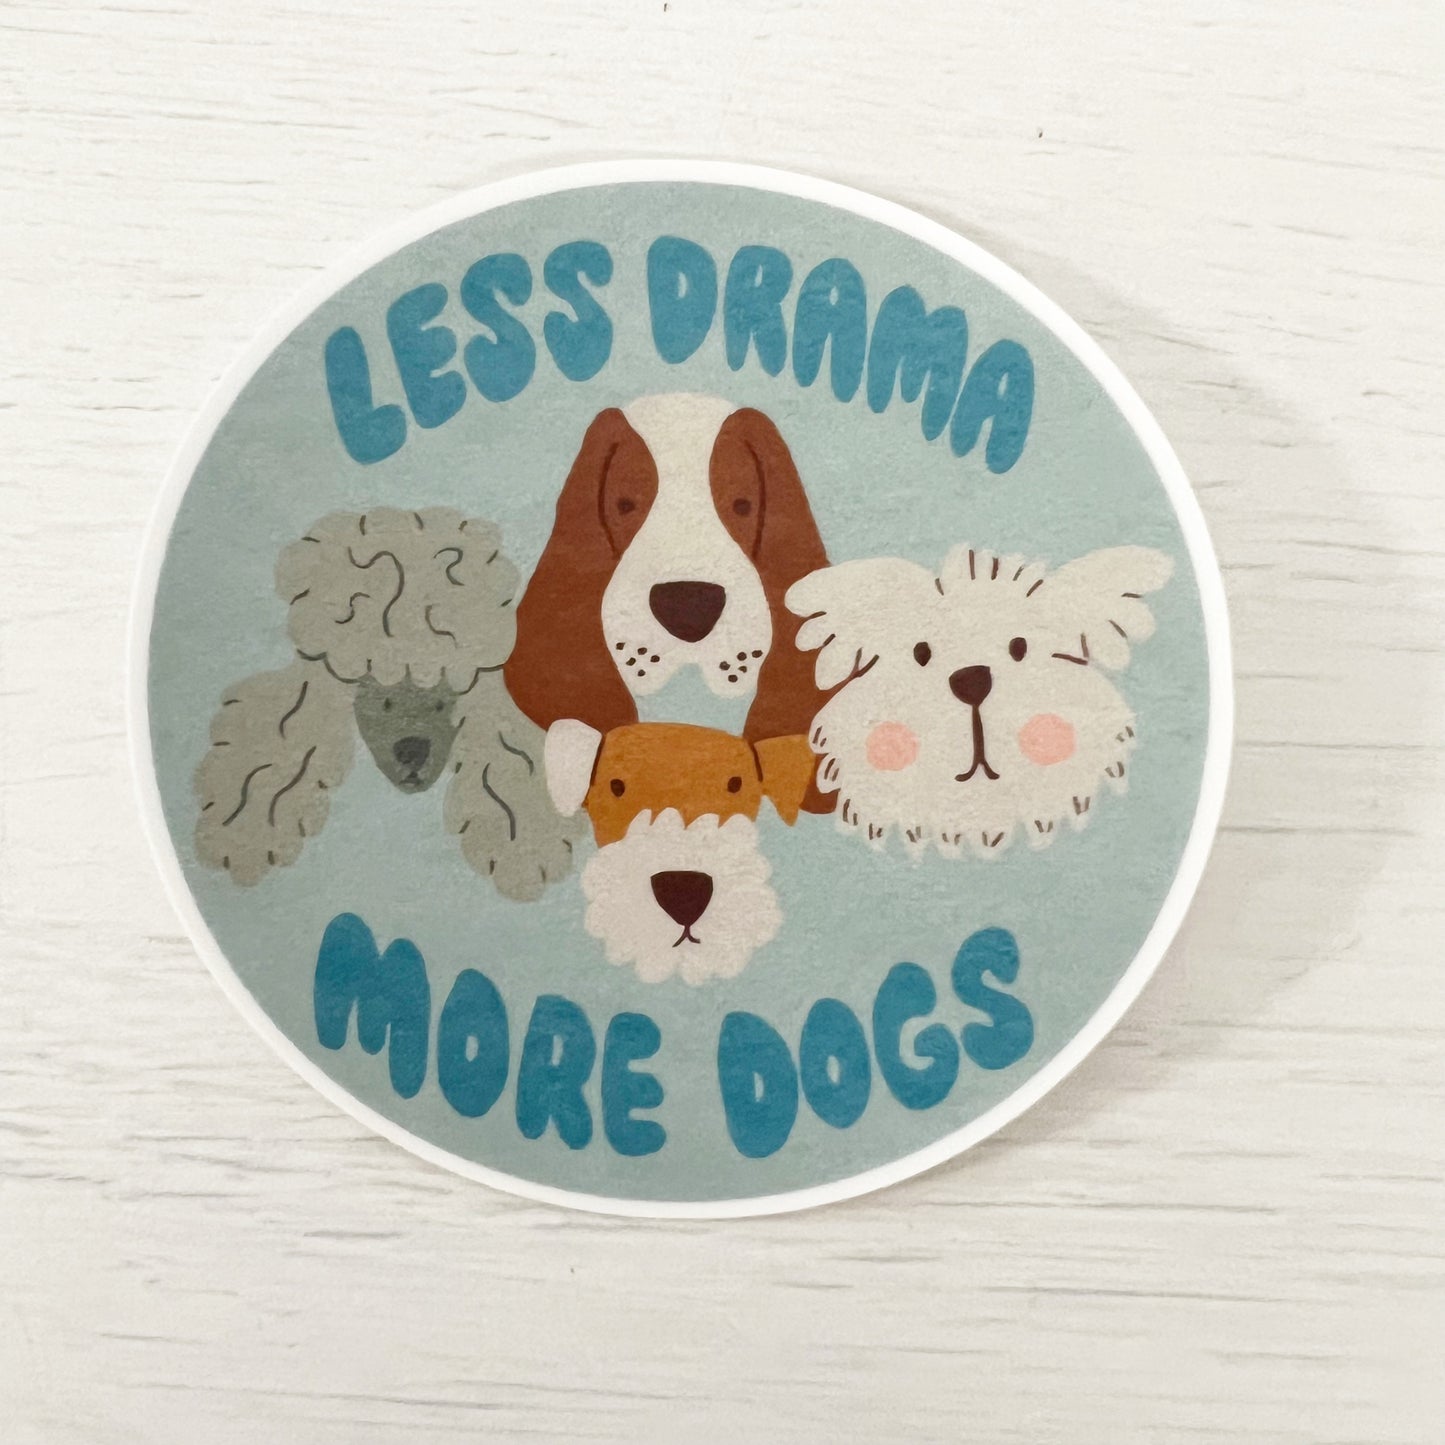 Less Drama More Dogs Sticker Decal